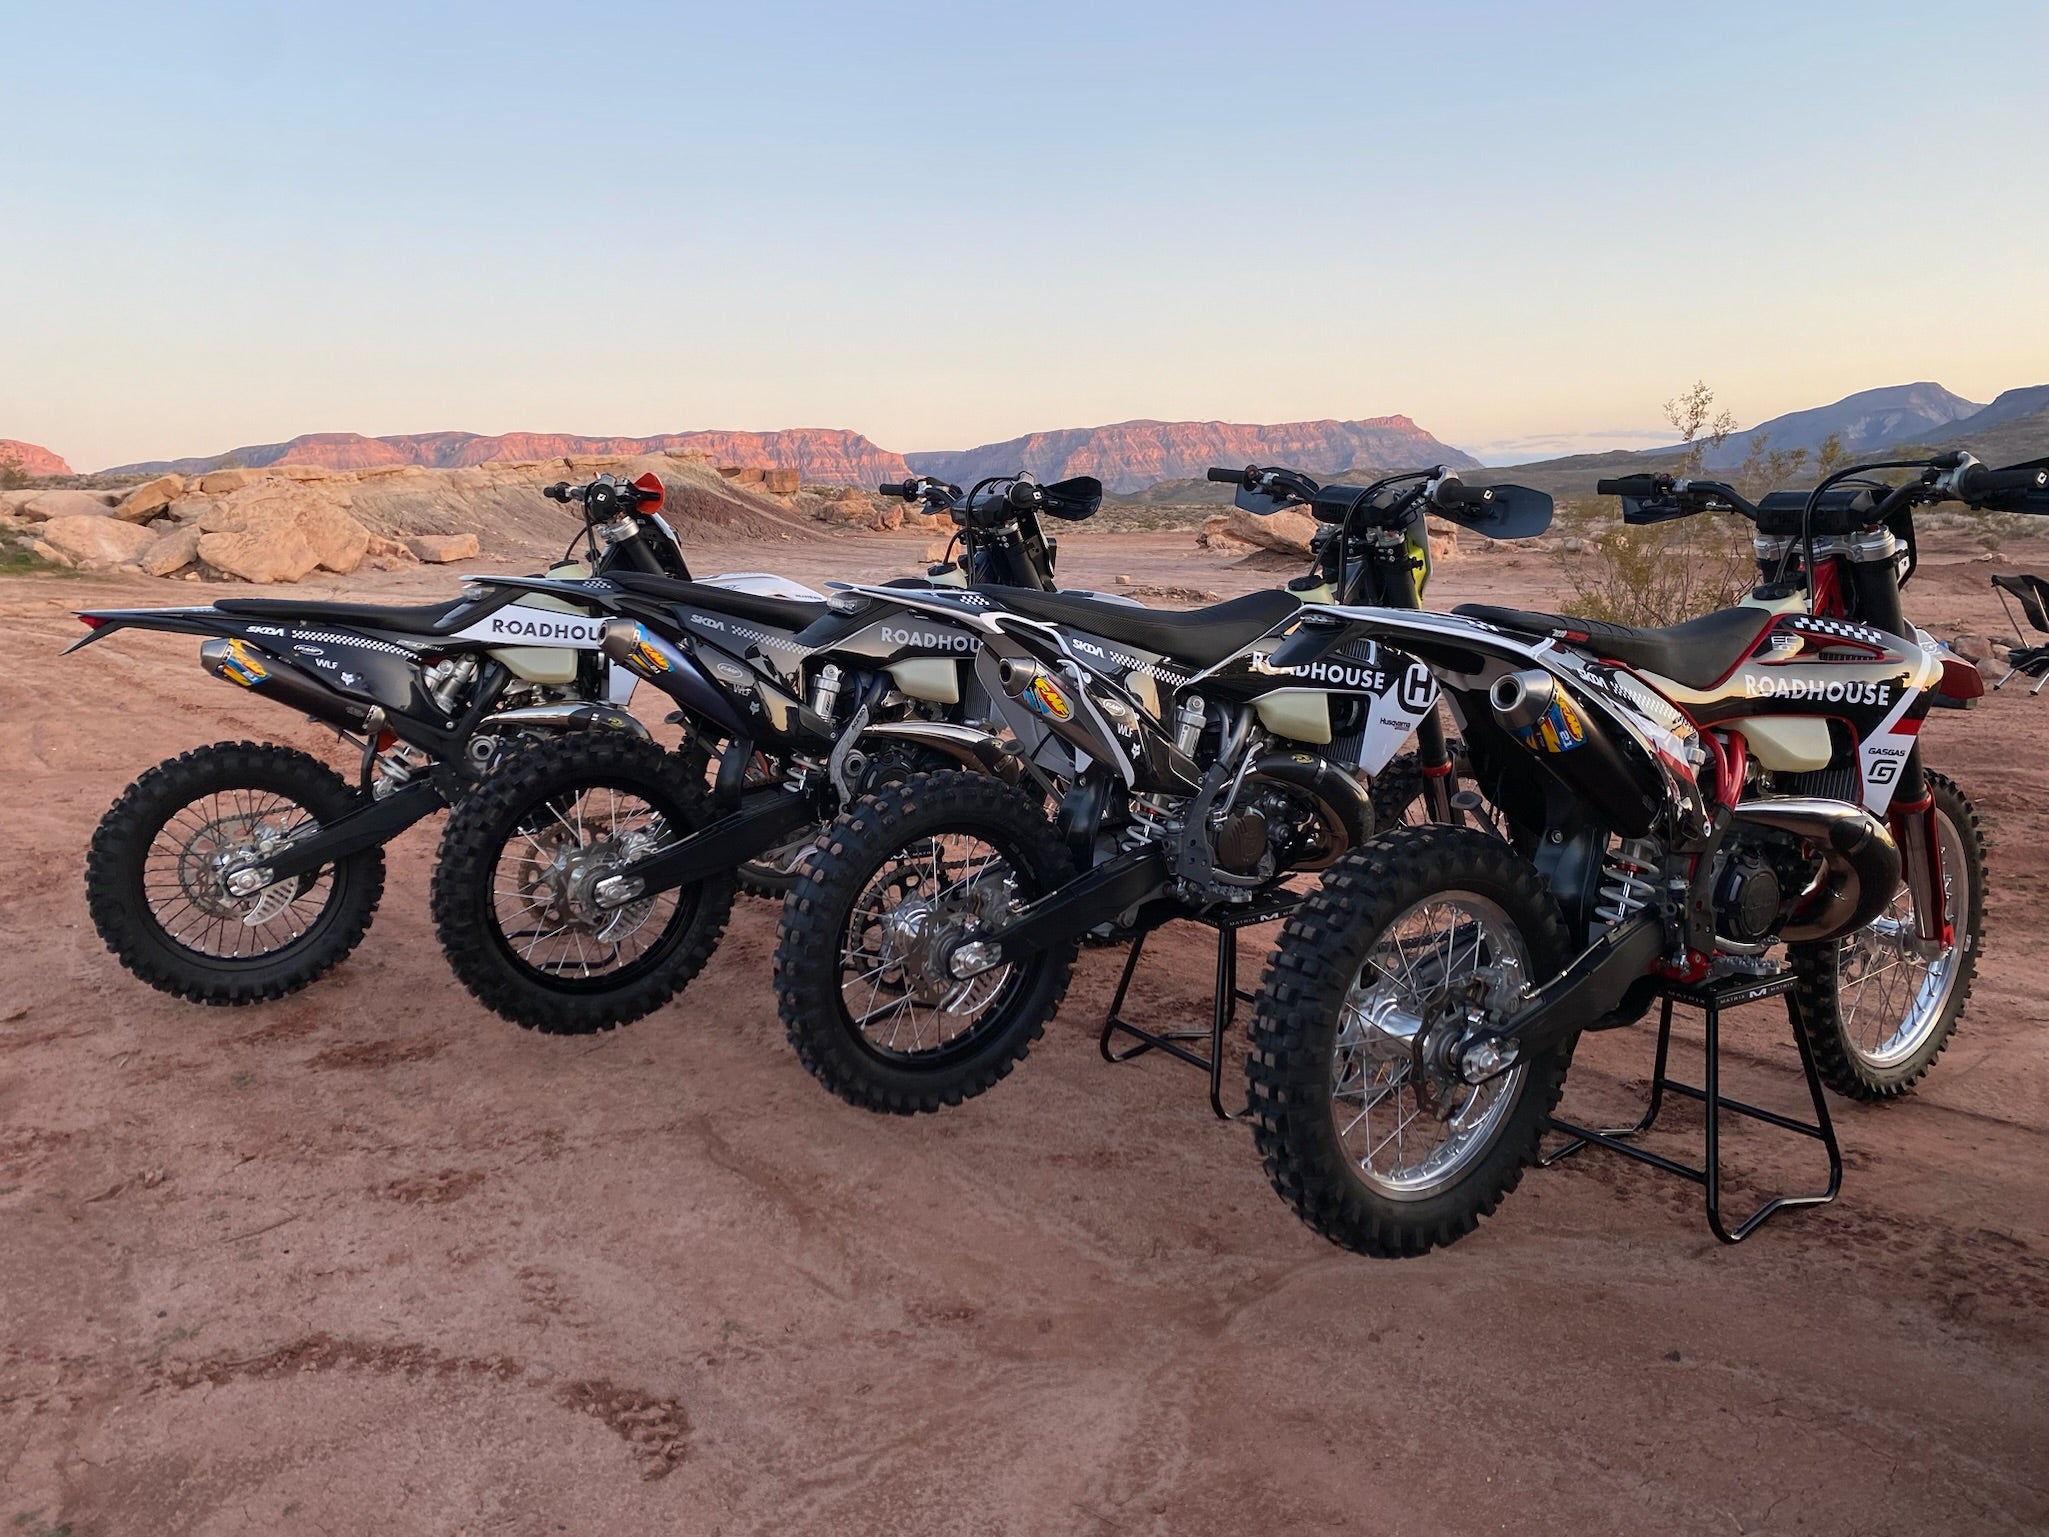 Introducing the First Adventure of our 2024 Adventure Series - Level Up x  St. George Utah with Roadhouse Feb 8th -11th 2024